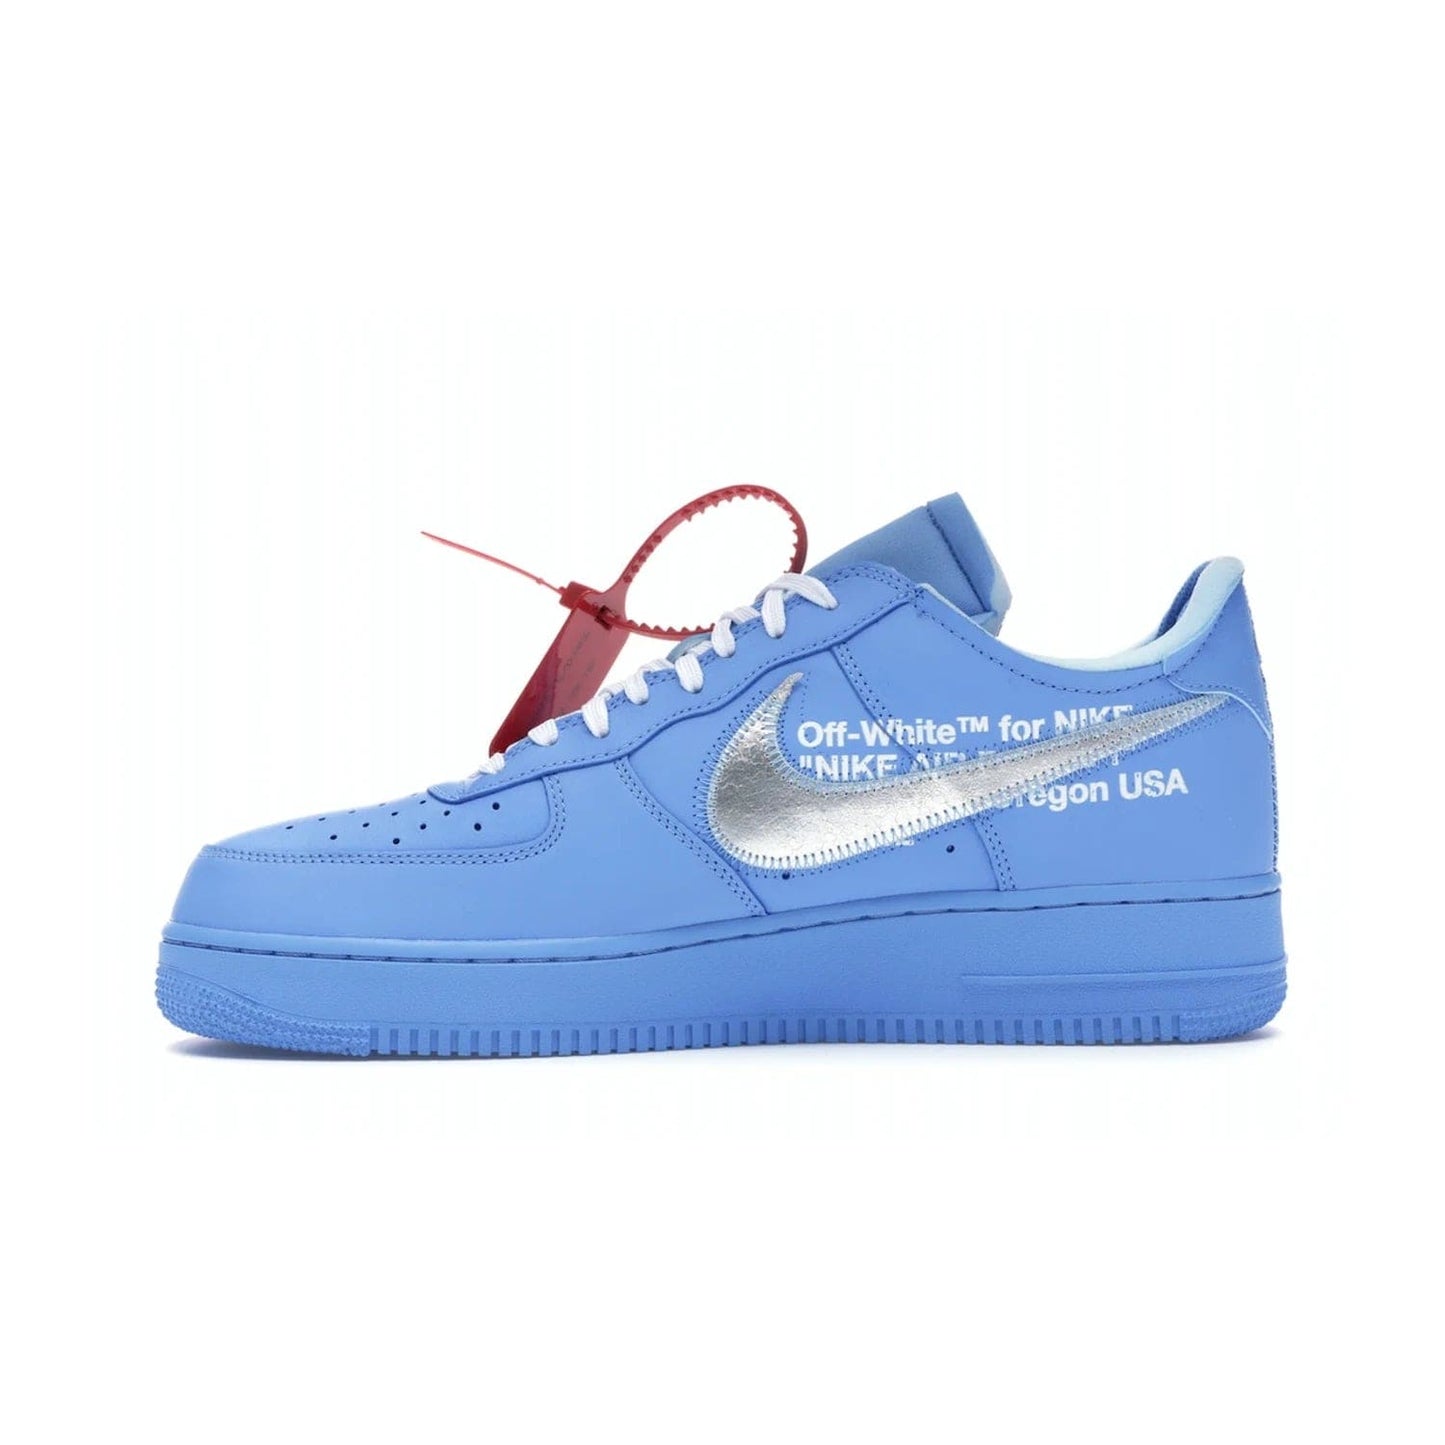 Nike Air Force 1 Low Off-White MCA University Blue - Image 19 - Only at www.BallersClubKickz.com - Virgil Abloh's Air Force 1 Low Off-White MCA University Blue: Features University Blue leather and midsole, reflective silver Nike Swoosh, red zip tie, white laces, and iconic Off-White™ branding. A must-have for any Virgil Abloh enthusiast.